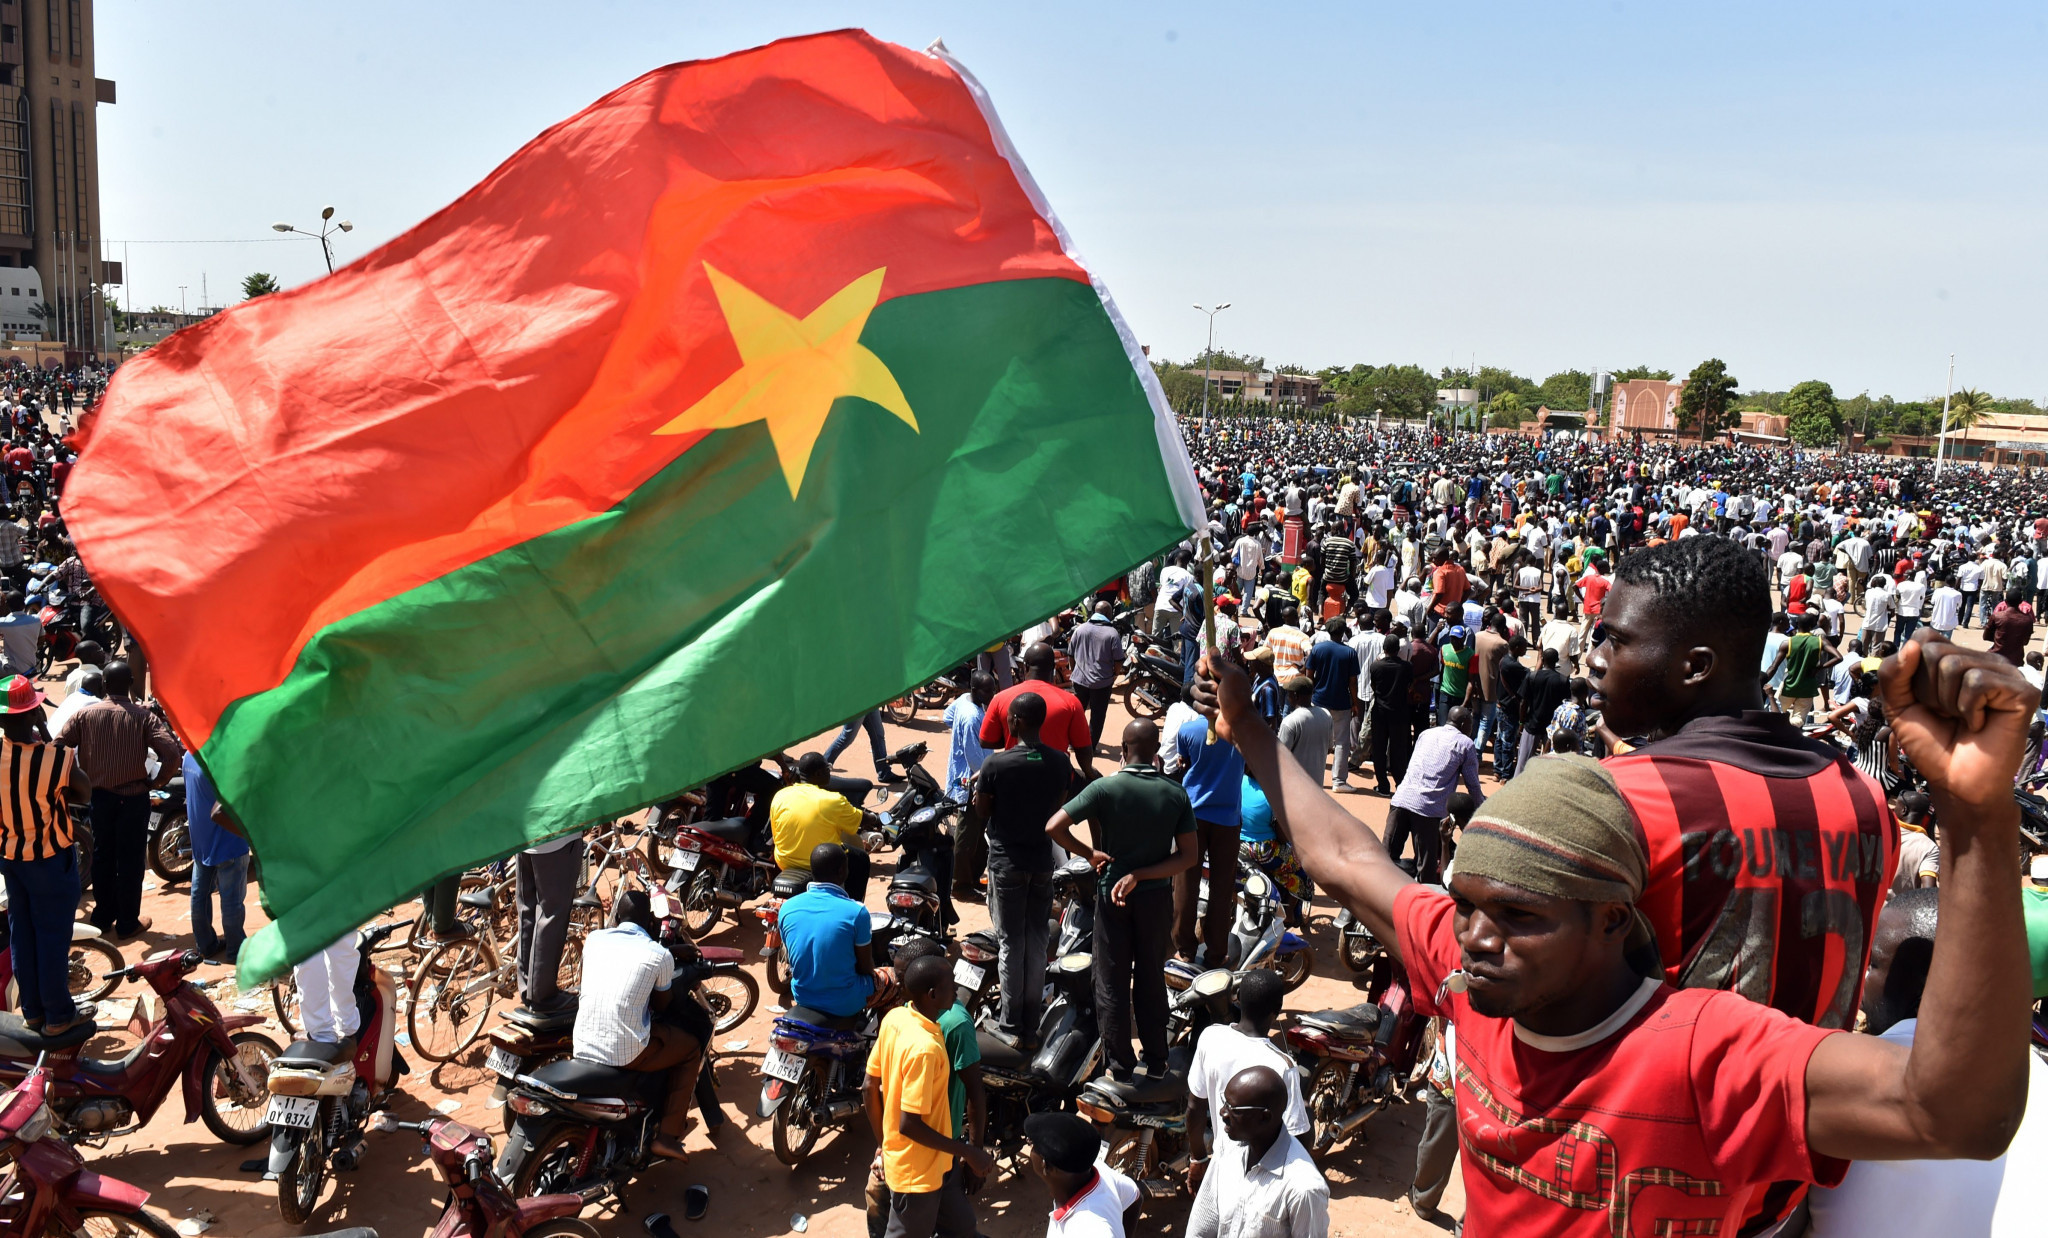 Burkina Faso interested in hosting 2027 African Games